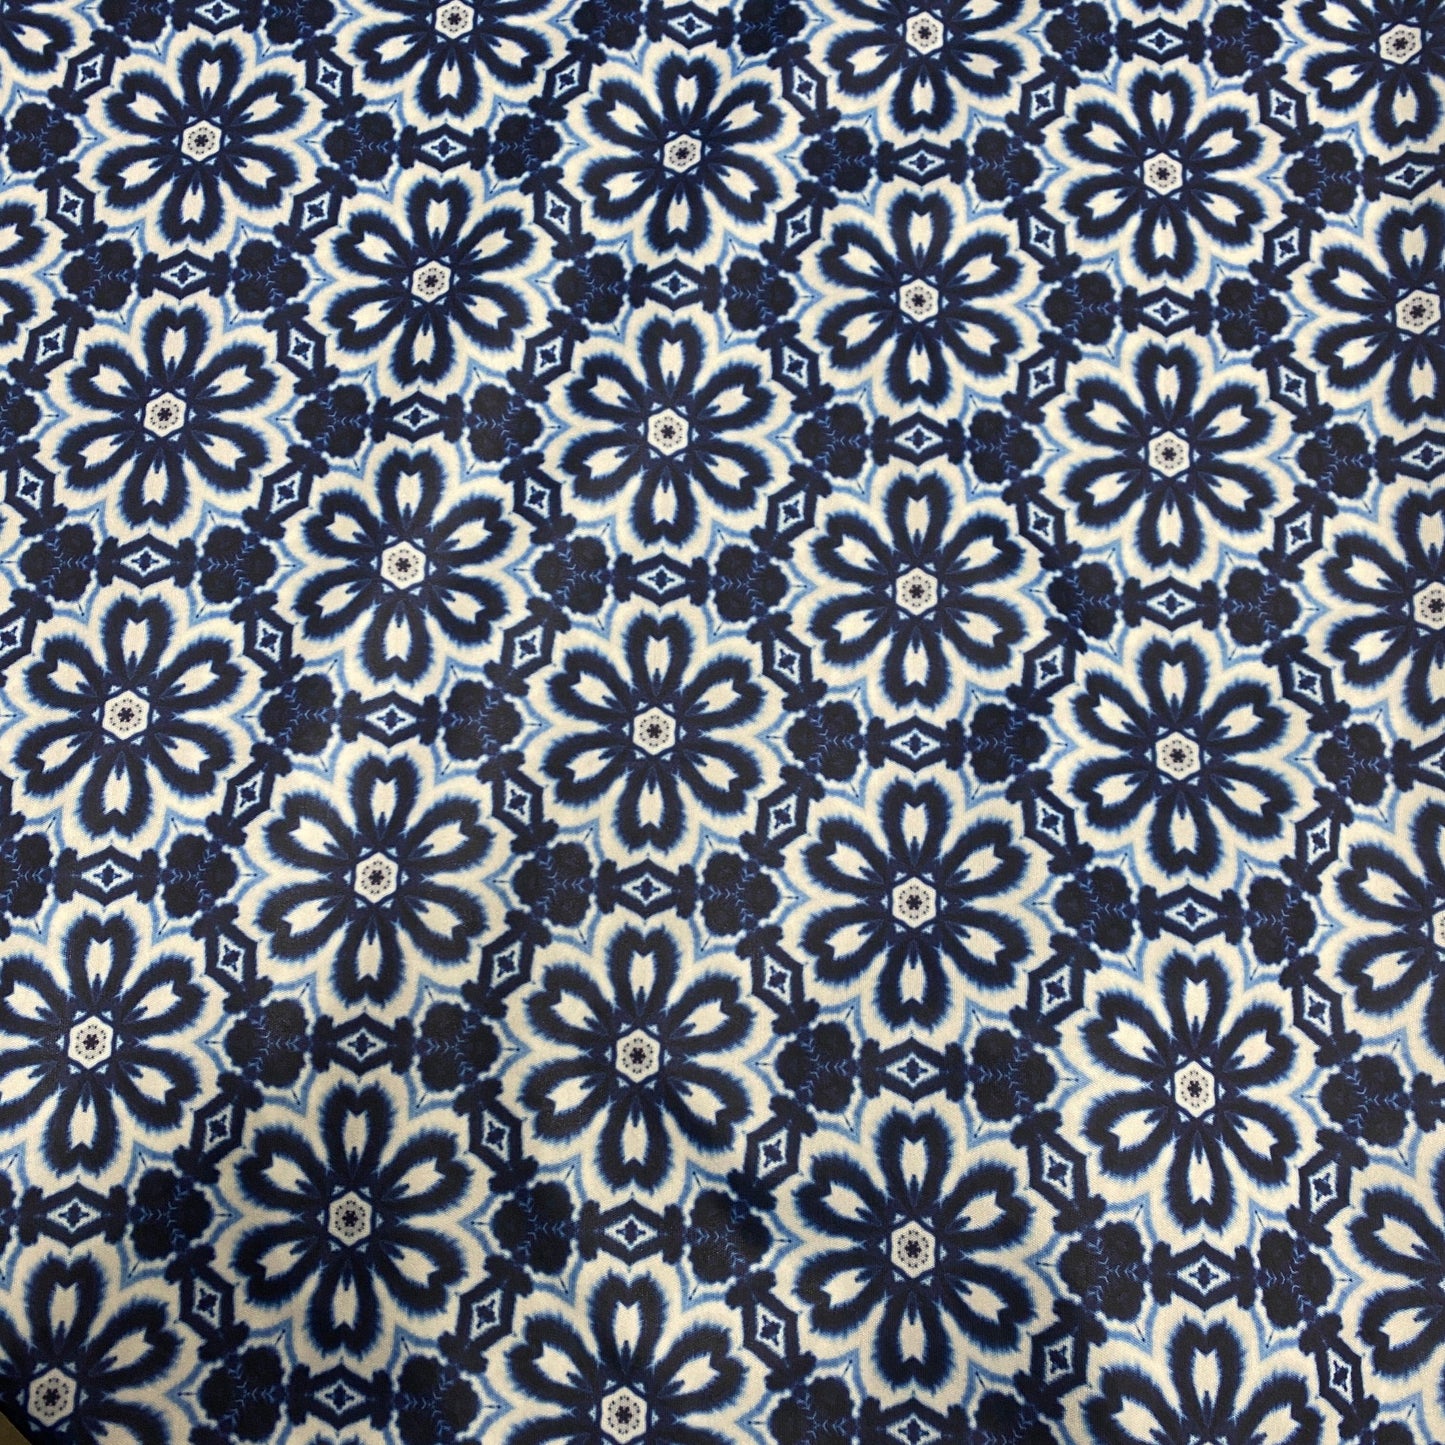 Blue Floral Batik 1 mil PUL Fabric - Made in the USA - Nature's Fabrics